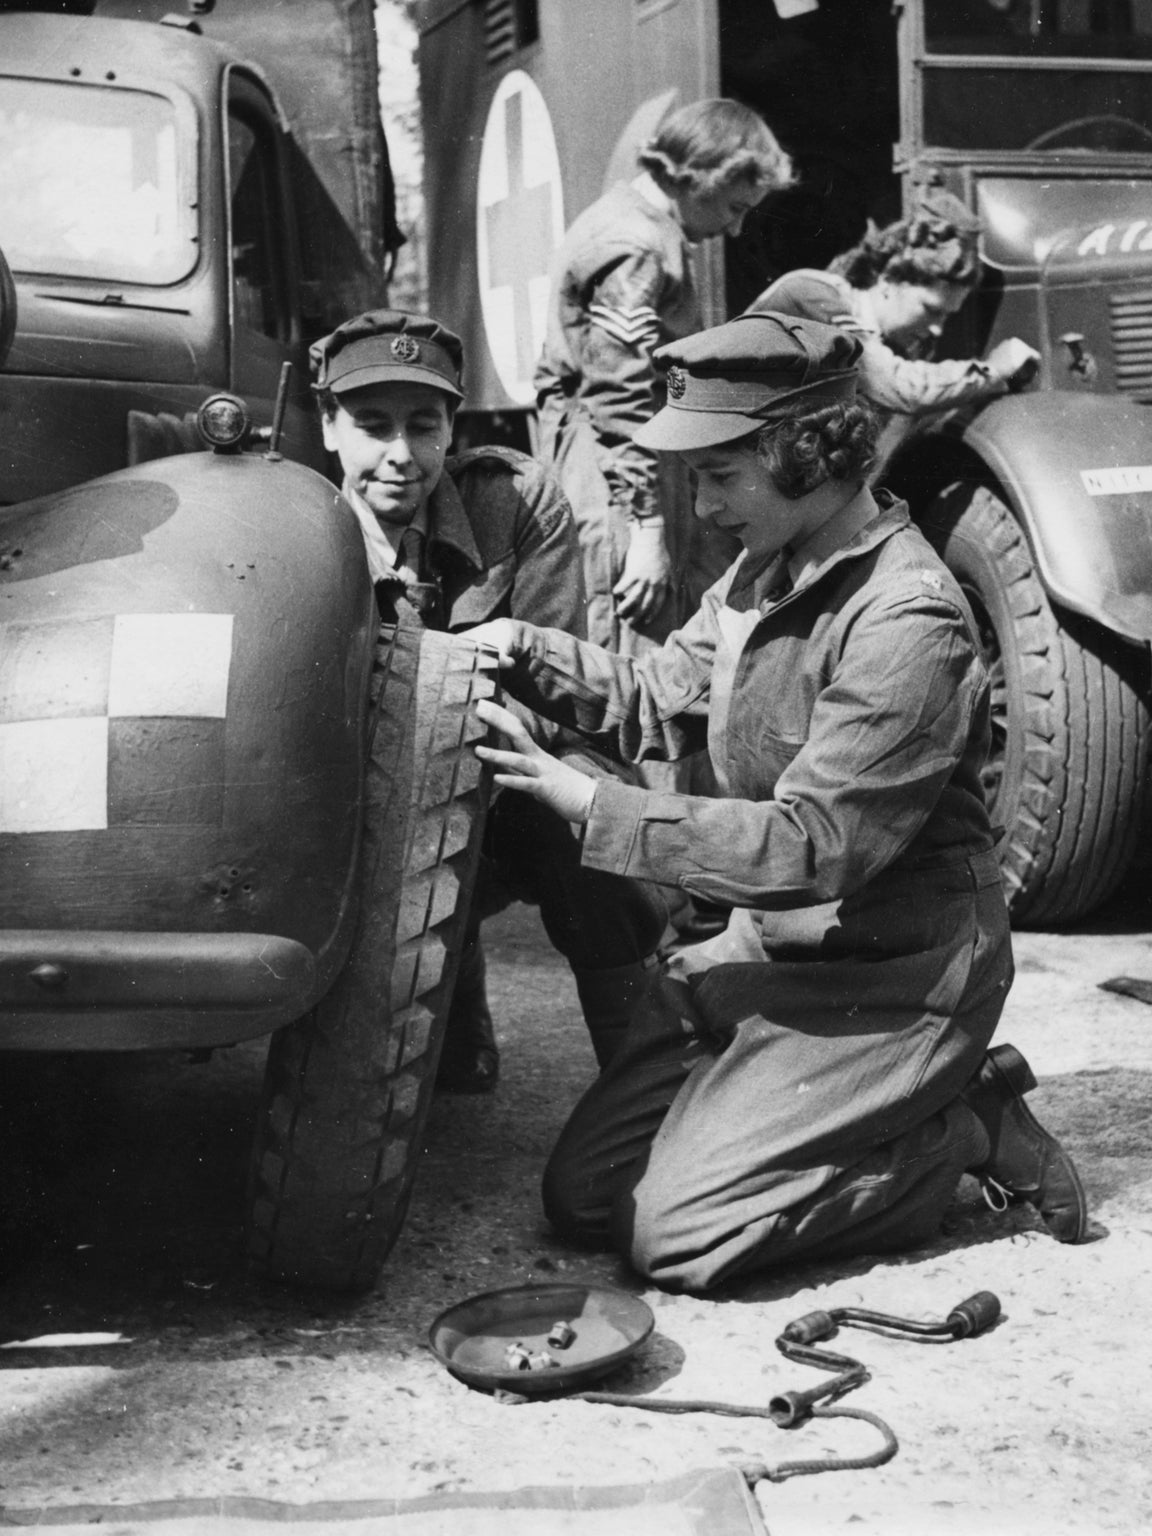 Just before the end of the war Elizabeth took part in training to become an ATS officer. She is pictured learning to change a tire, 1945